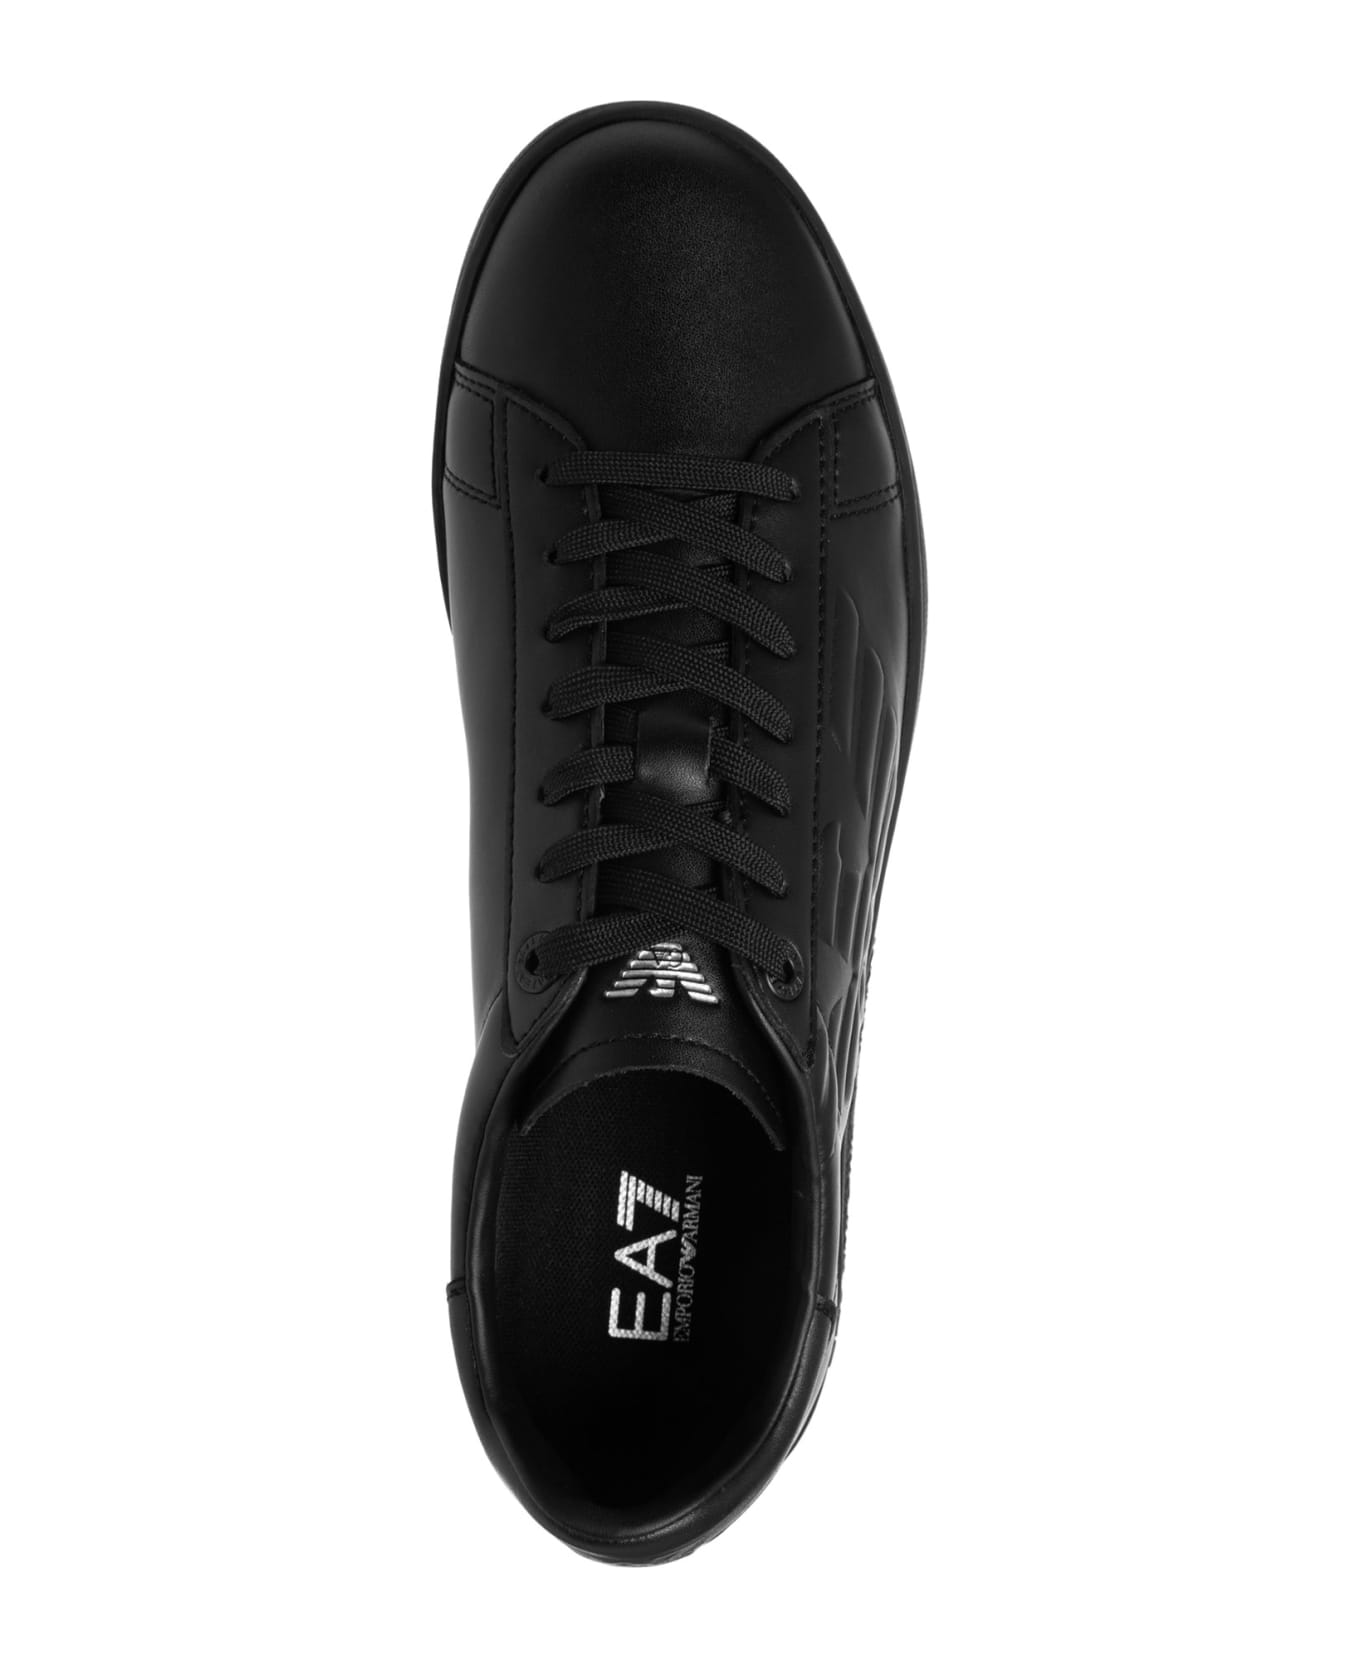 EA7 Classic New Cc Leather Sneakers - Black